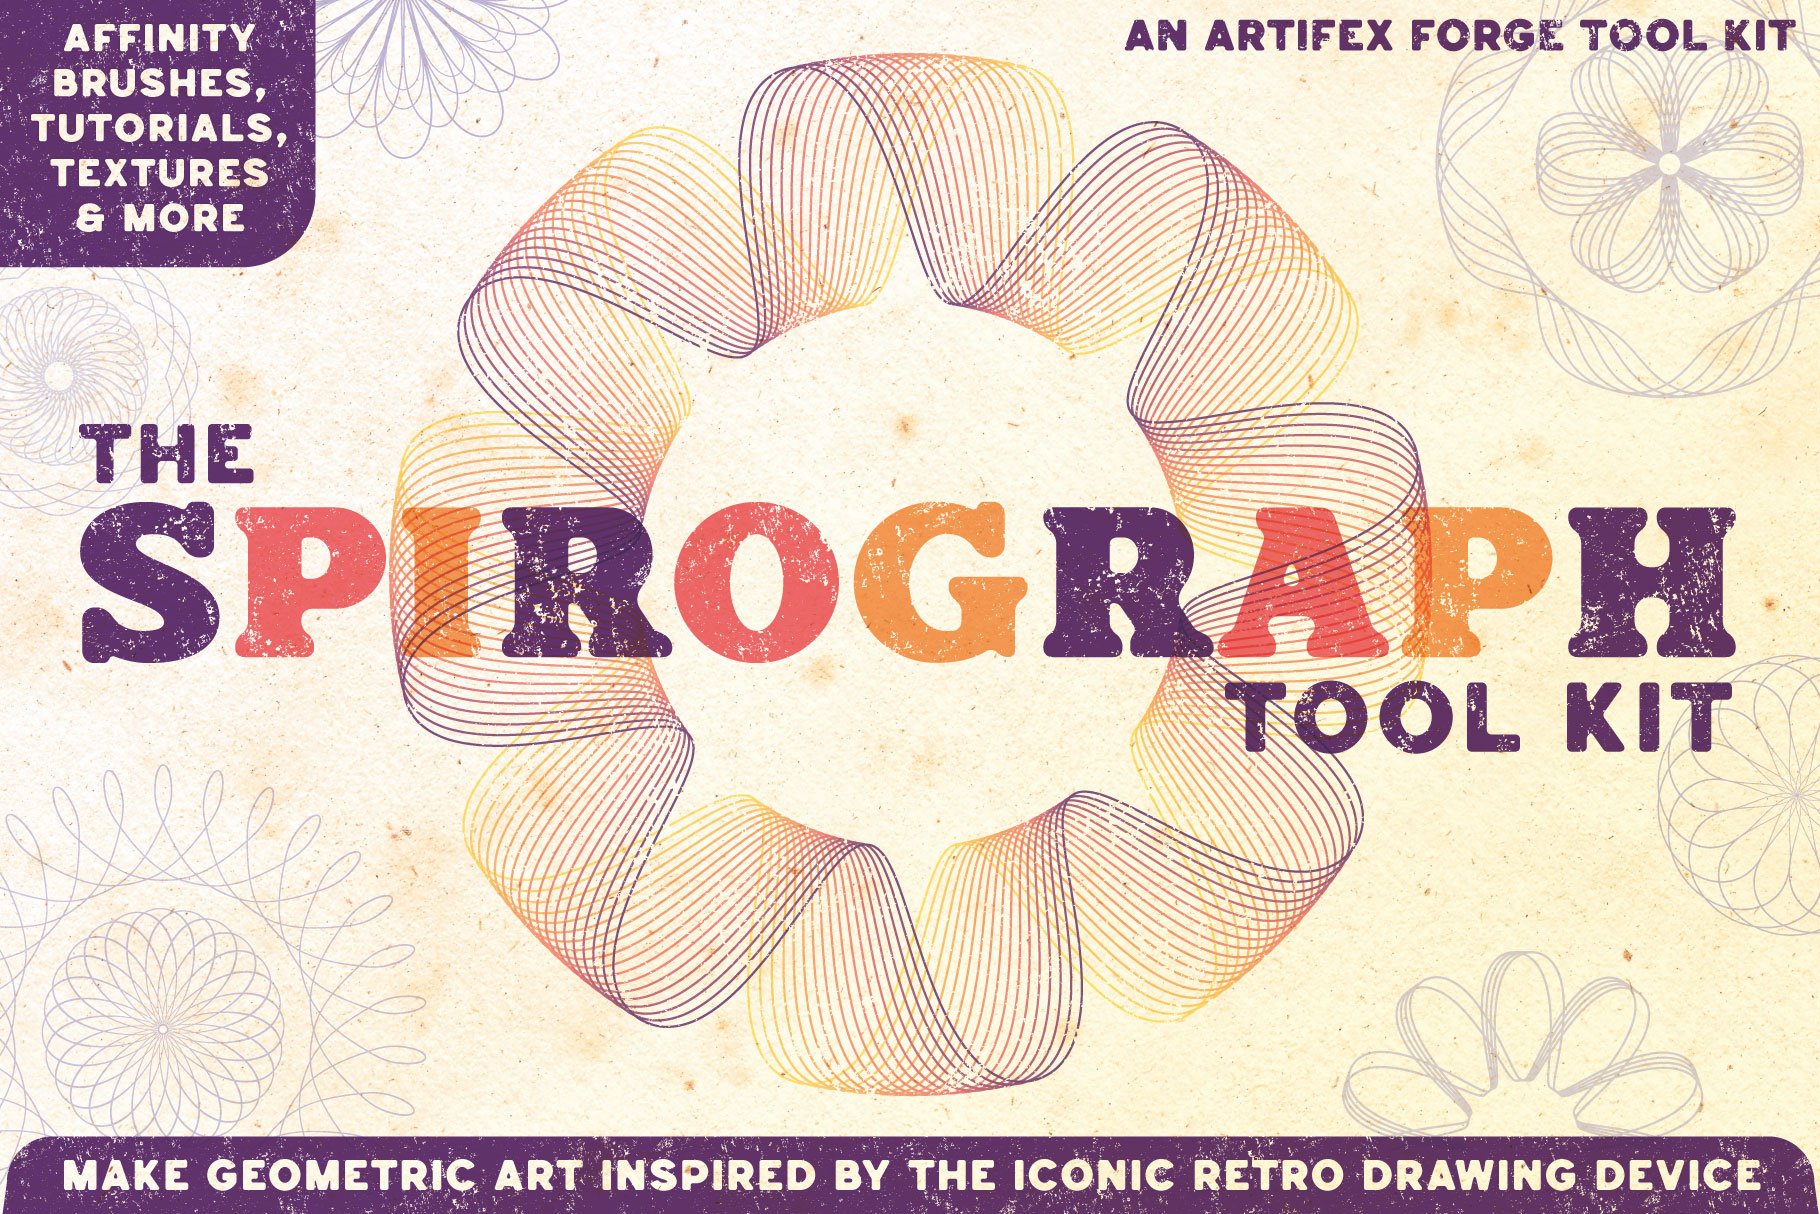 The Spirograph Tool Kit - Affinity